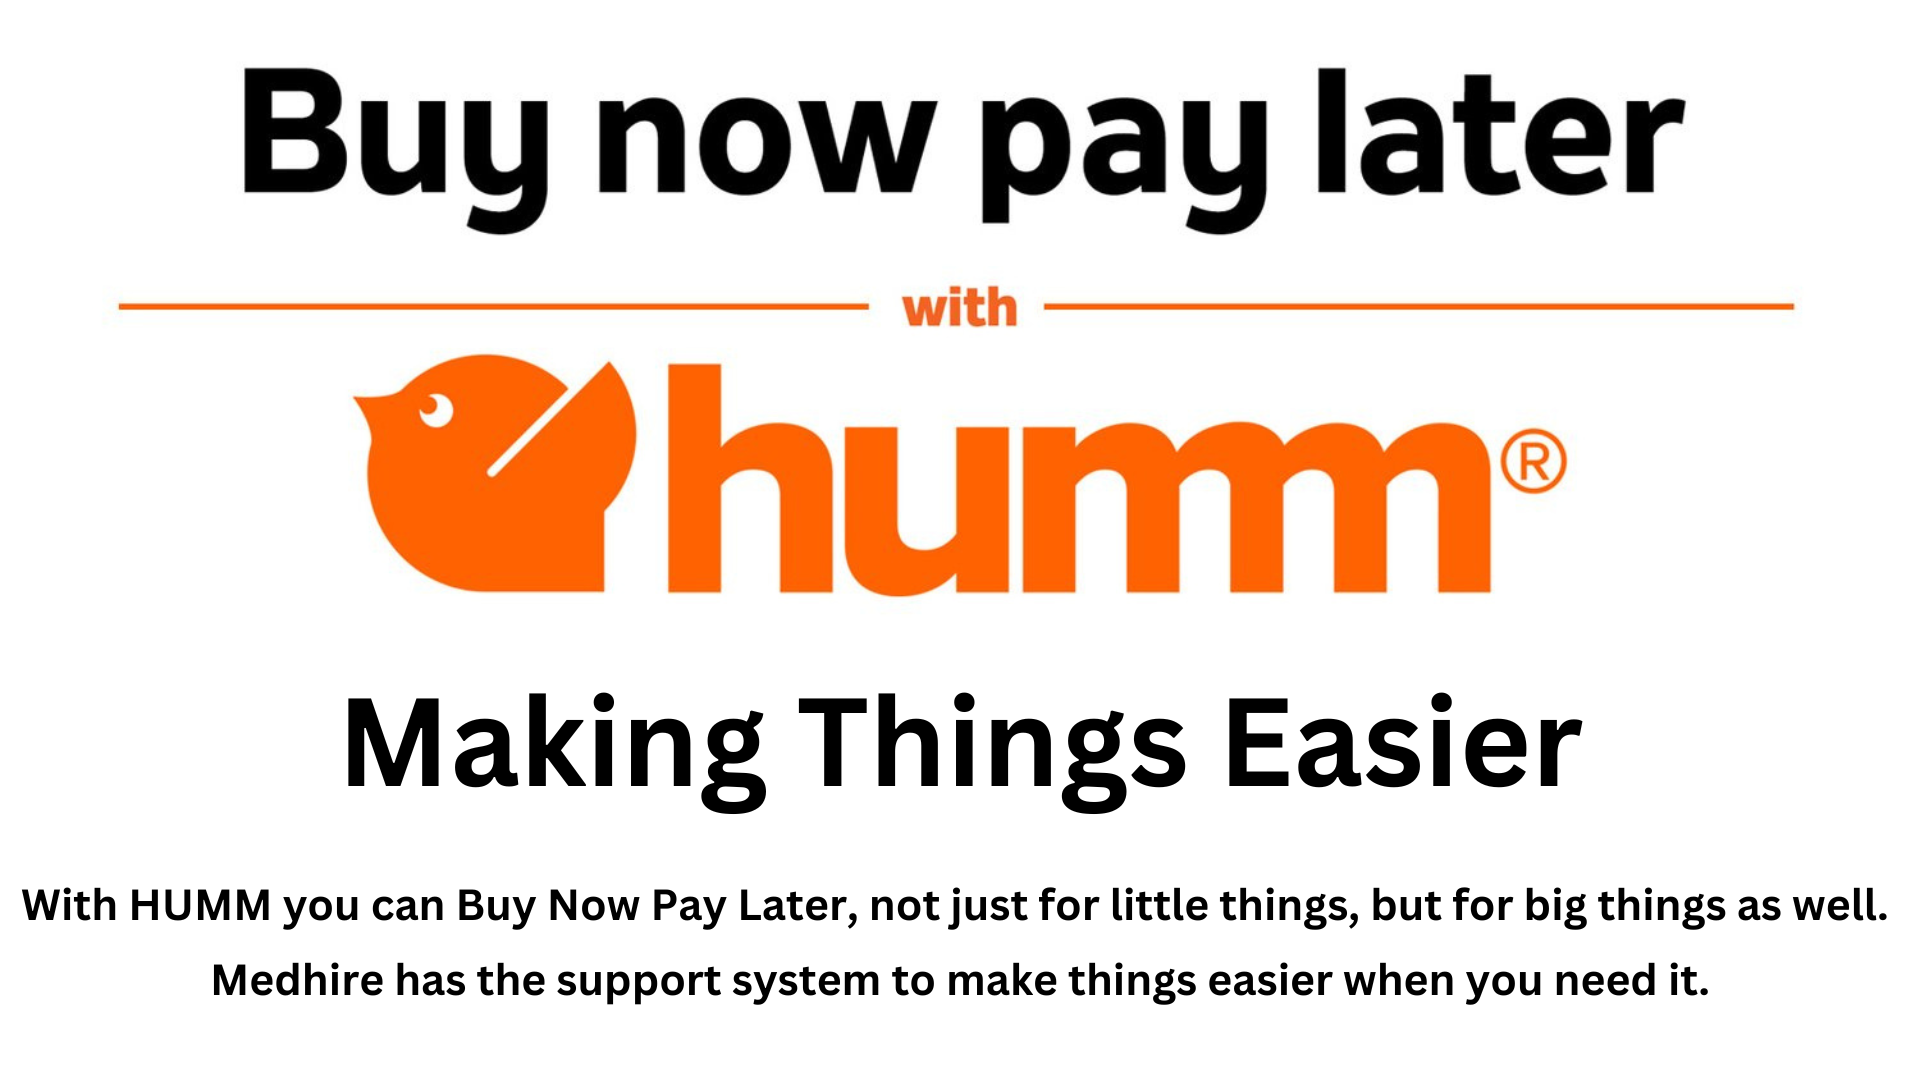 Medhire - Buy Now Pay Later With HUMM